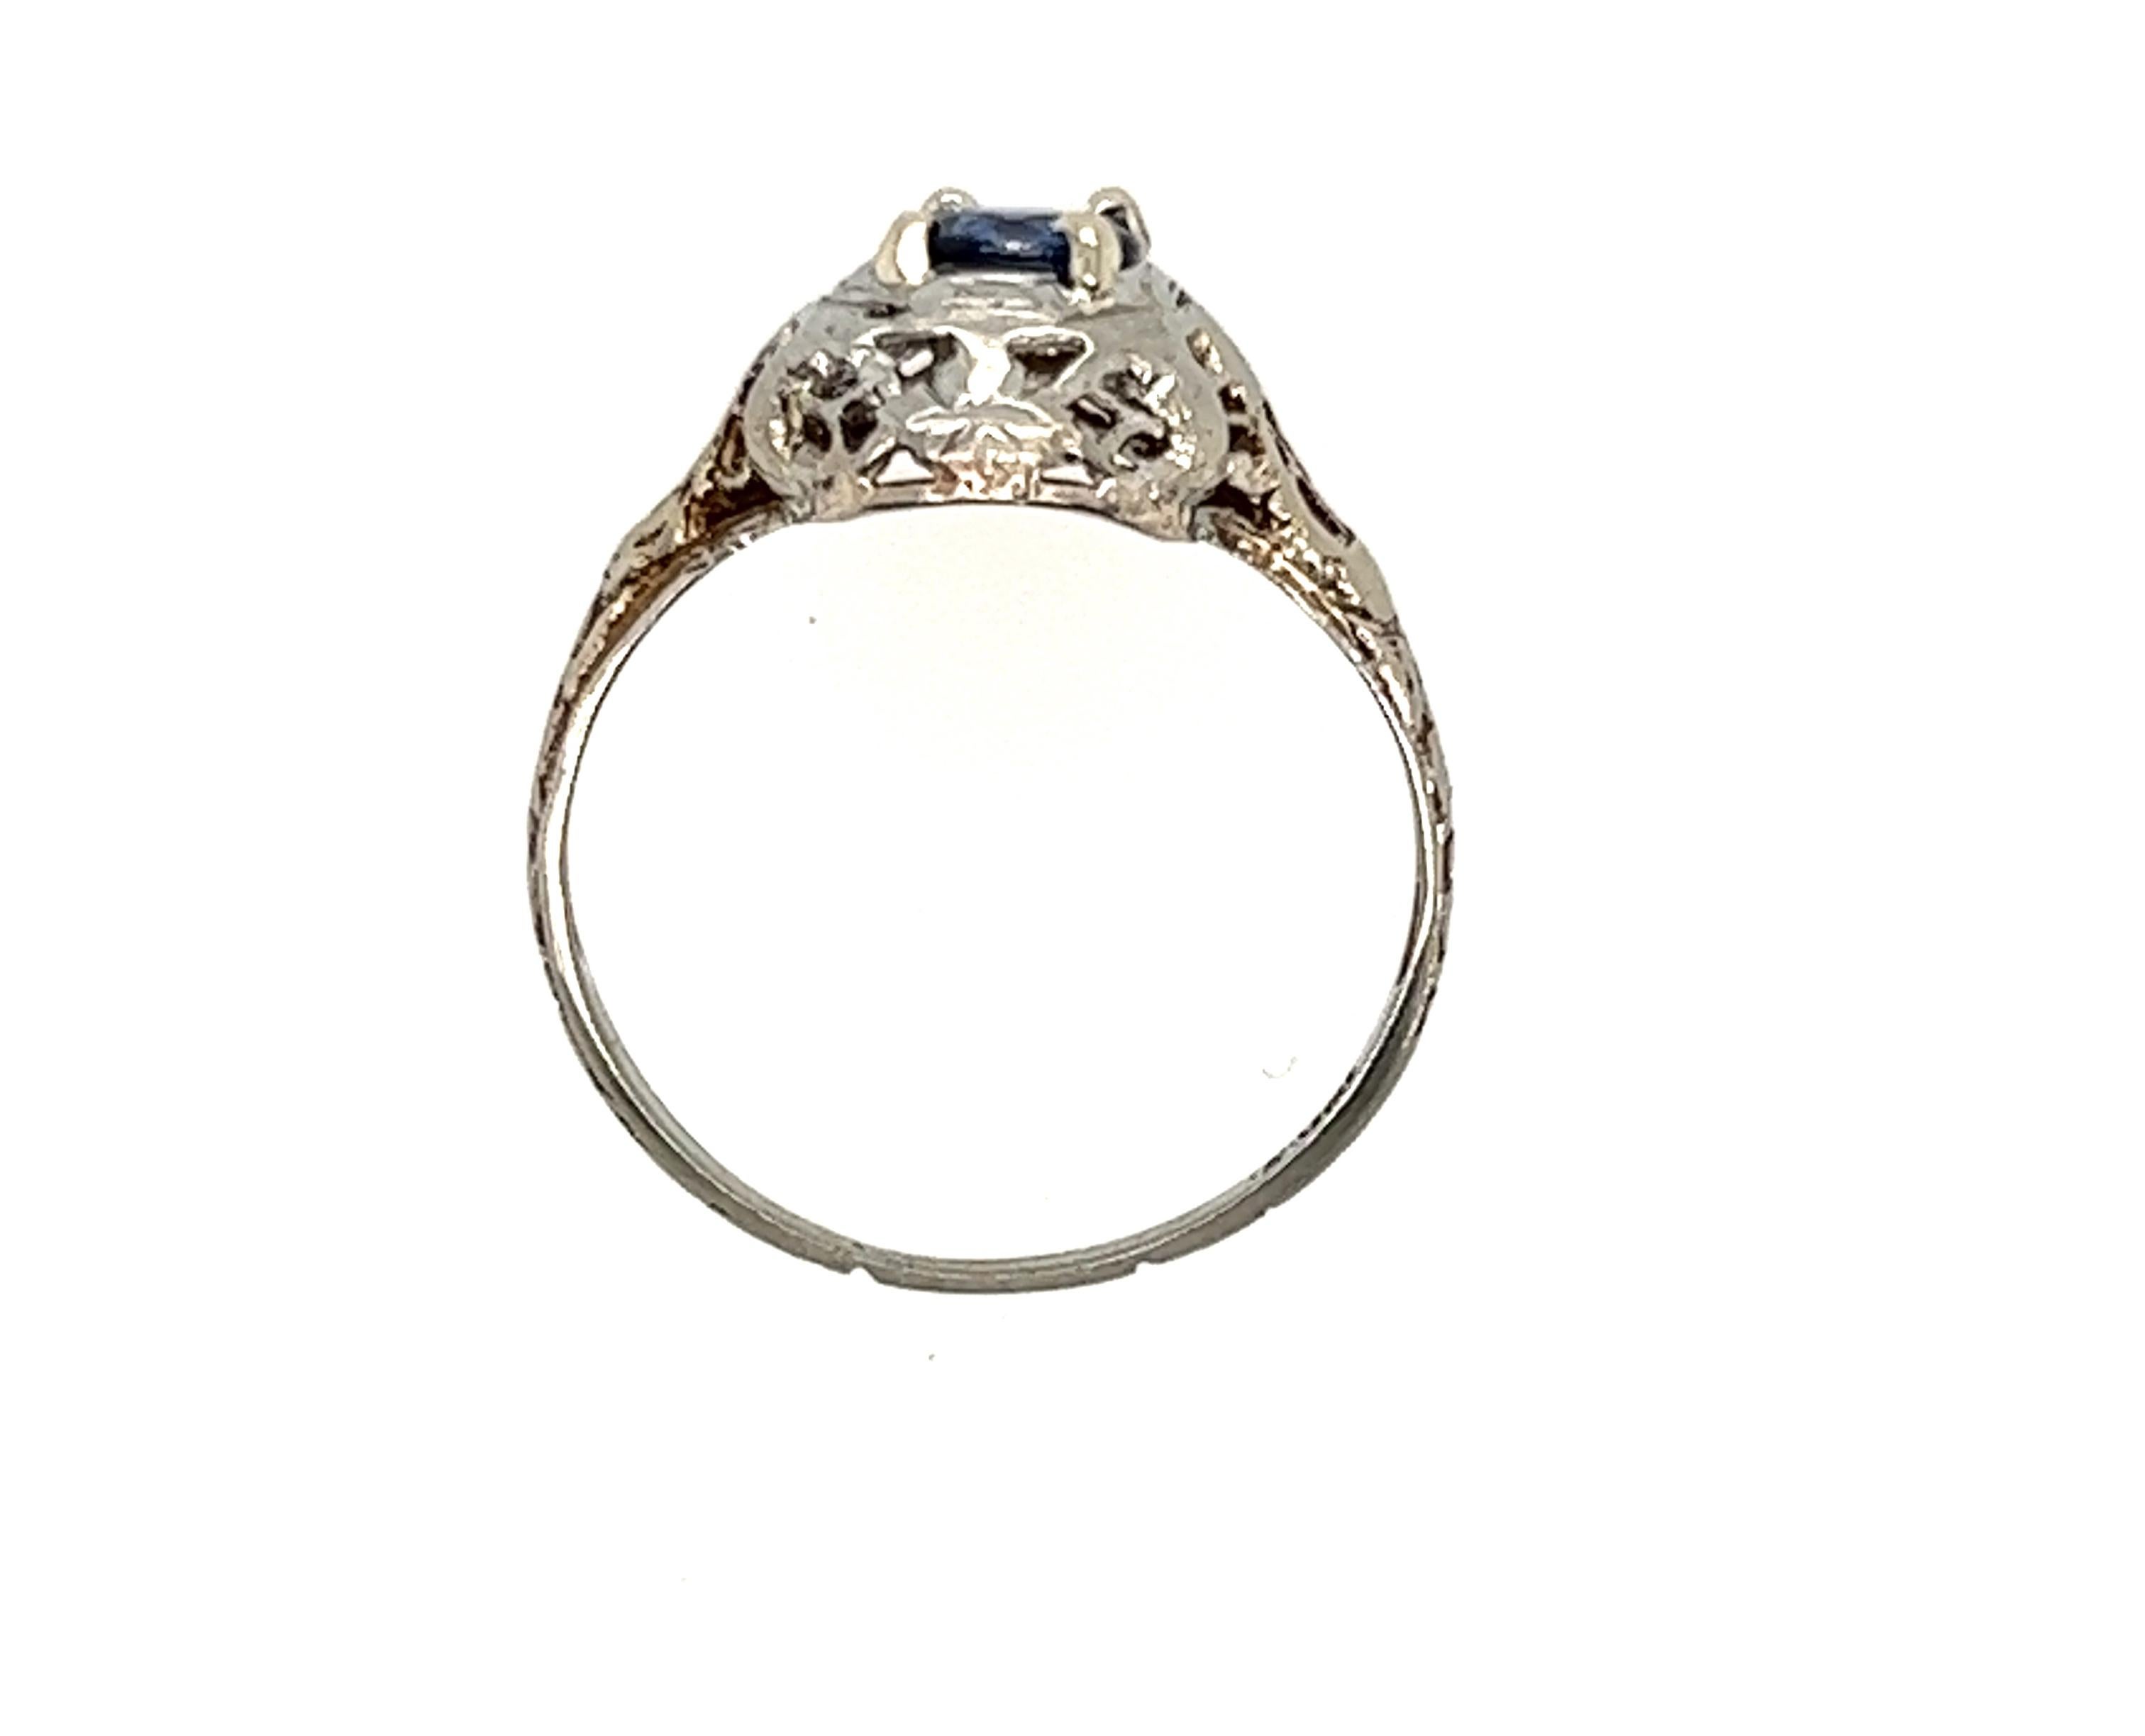 Genuine Original Art Deco Antique from 1920's Sapphire Engagement Ring 1/2ct 18K White Gold 


Featuring a Gorgeous .50 Carat Natural Round Dark Blue Sapphire

Hand Carved Details 

Perfect Alternative Engagement Ring

100% Natural Sapphire 

.50